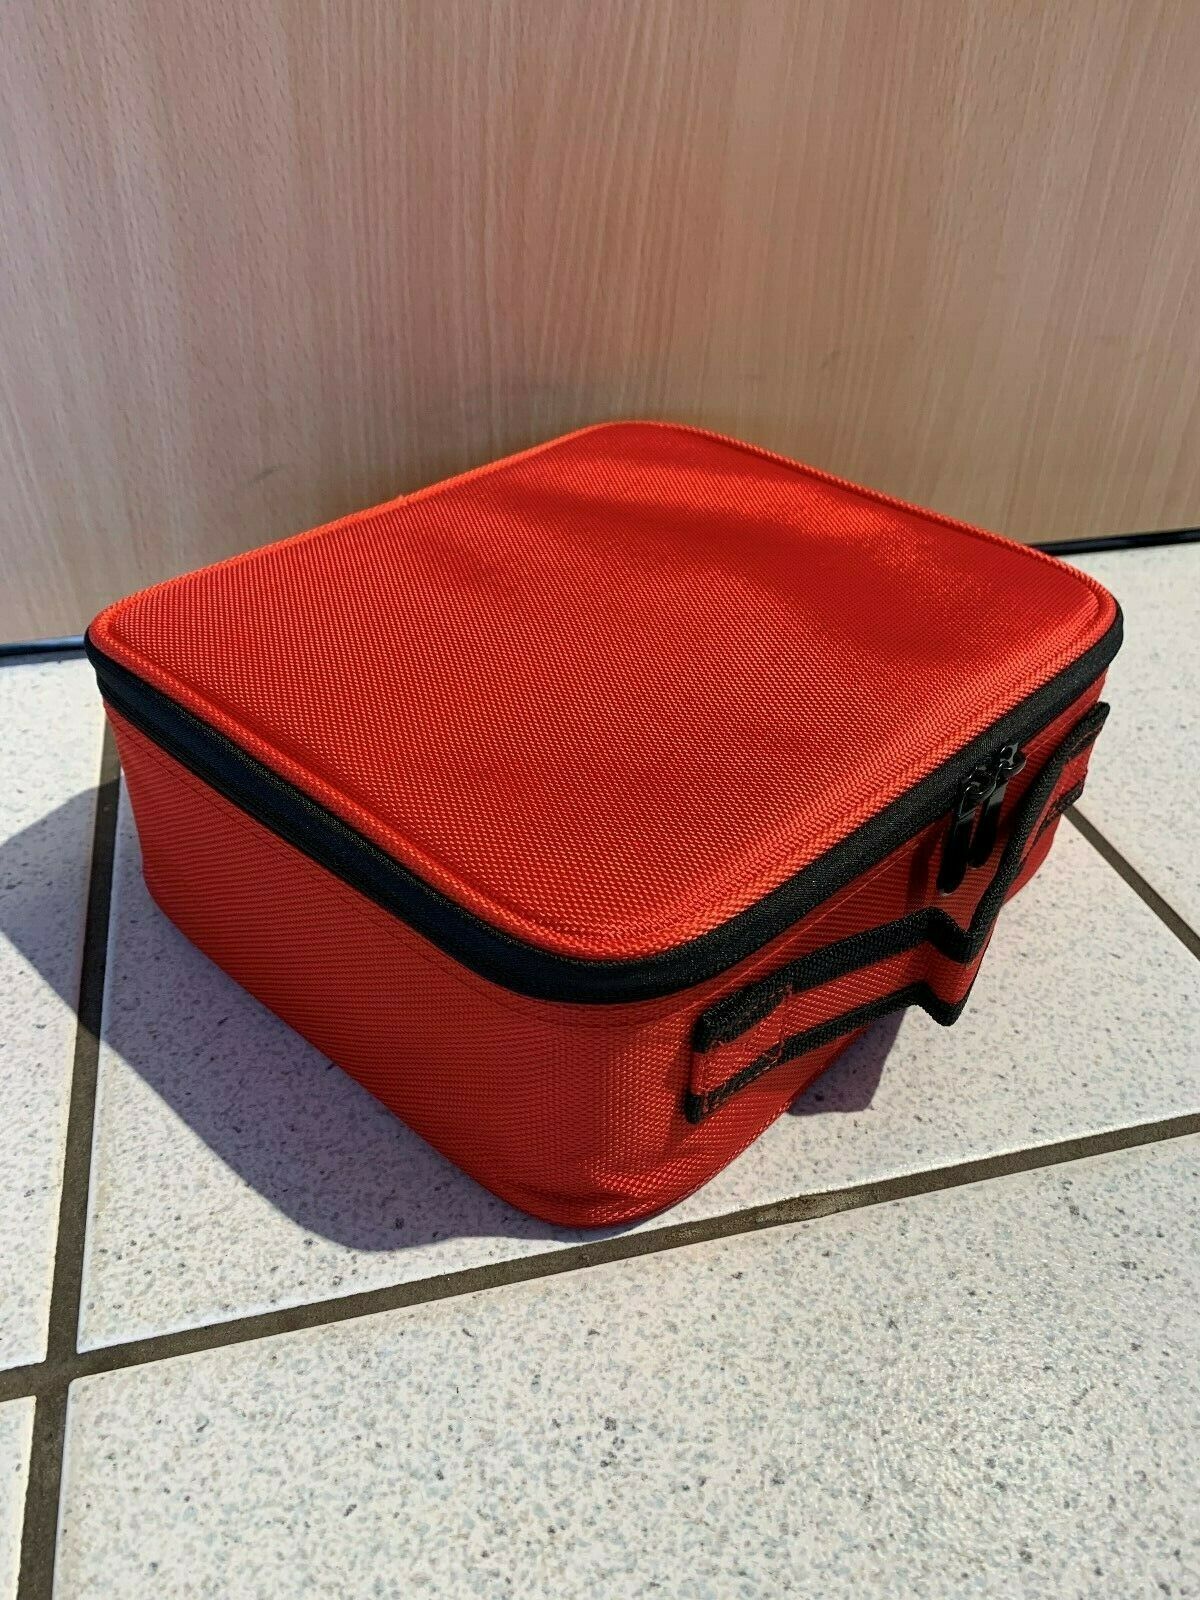 NEW Small 10" 26cm Red Camera Photographers Hard Protective Carry Case Box